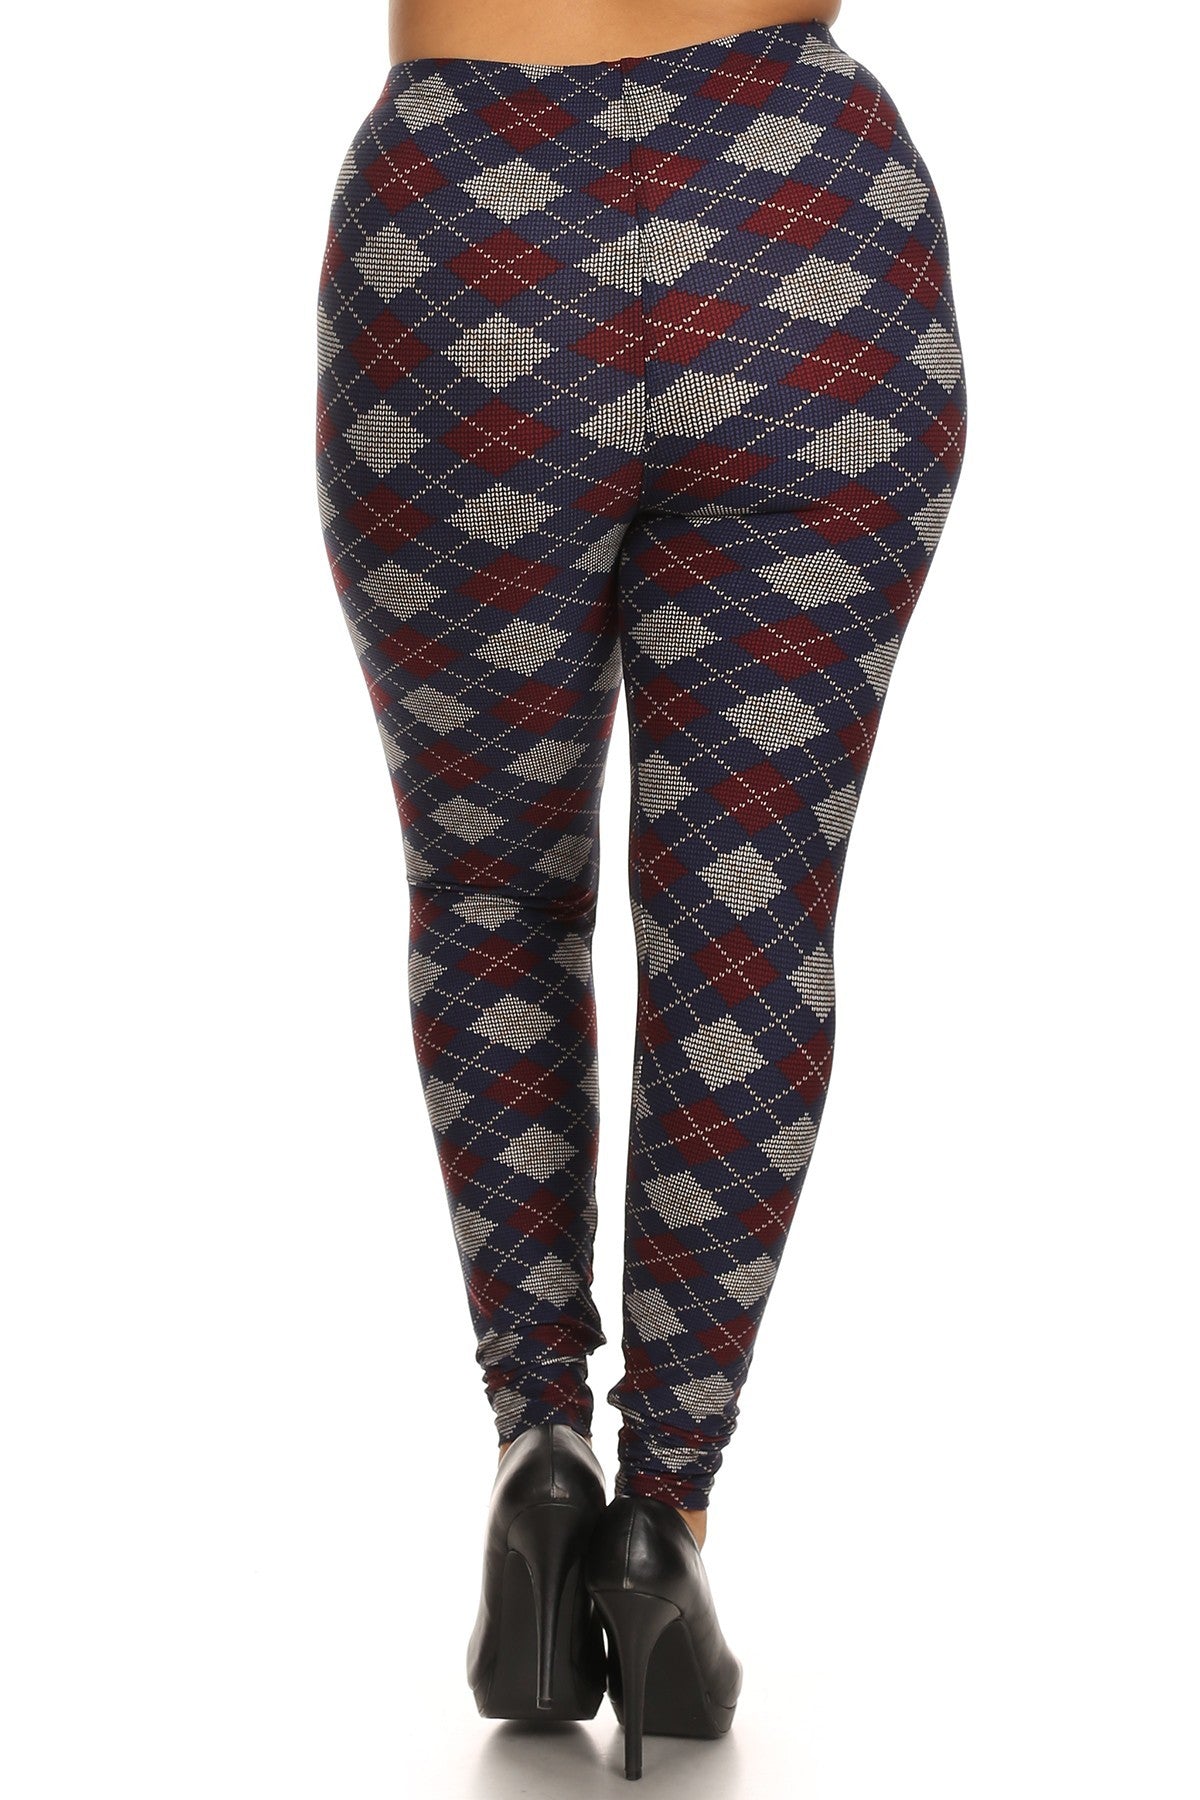 Plus Size Plaid Graphic Printed Knit Legging With Elastic Waist Detail - Love It Clothing